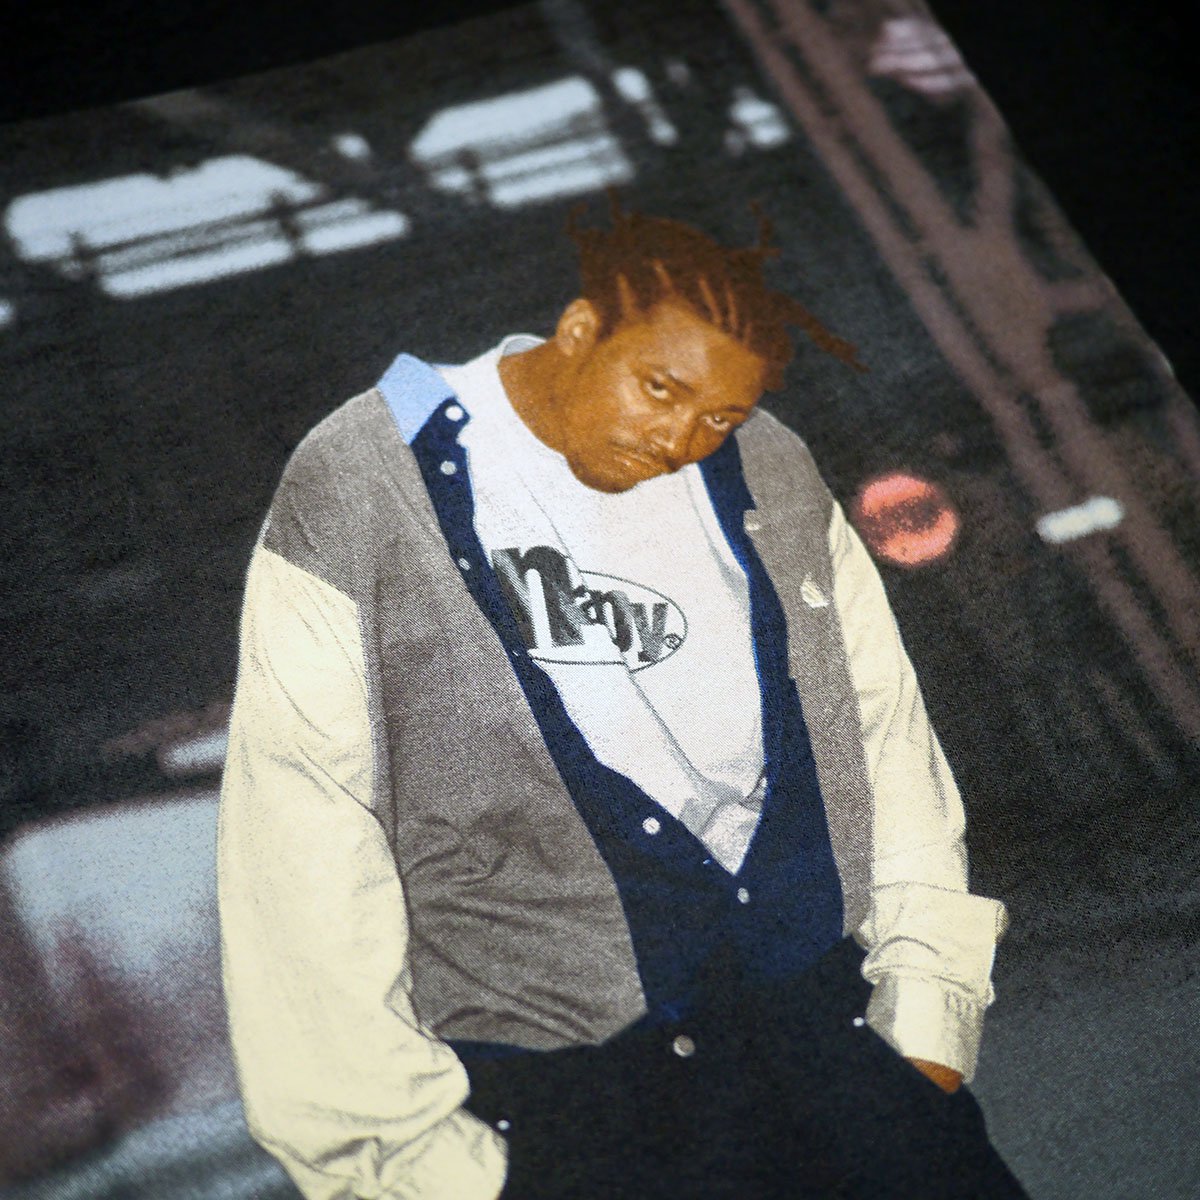 Fedup | HIPHOP WEAR | <img class='new_mark_img1' src='https://img.shop-pro.jp/img/new/icons30.gif' style='border:none;display:inline;margin:0px;padding:0px;width:auto;' />Ol' Dirty Bastard 